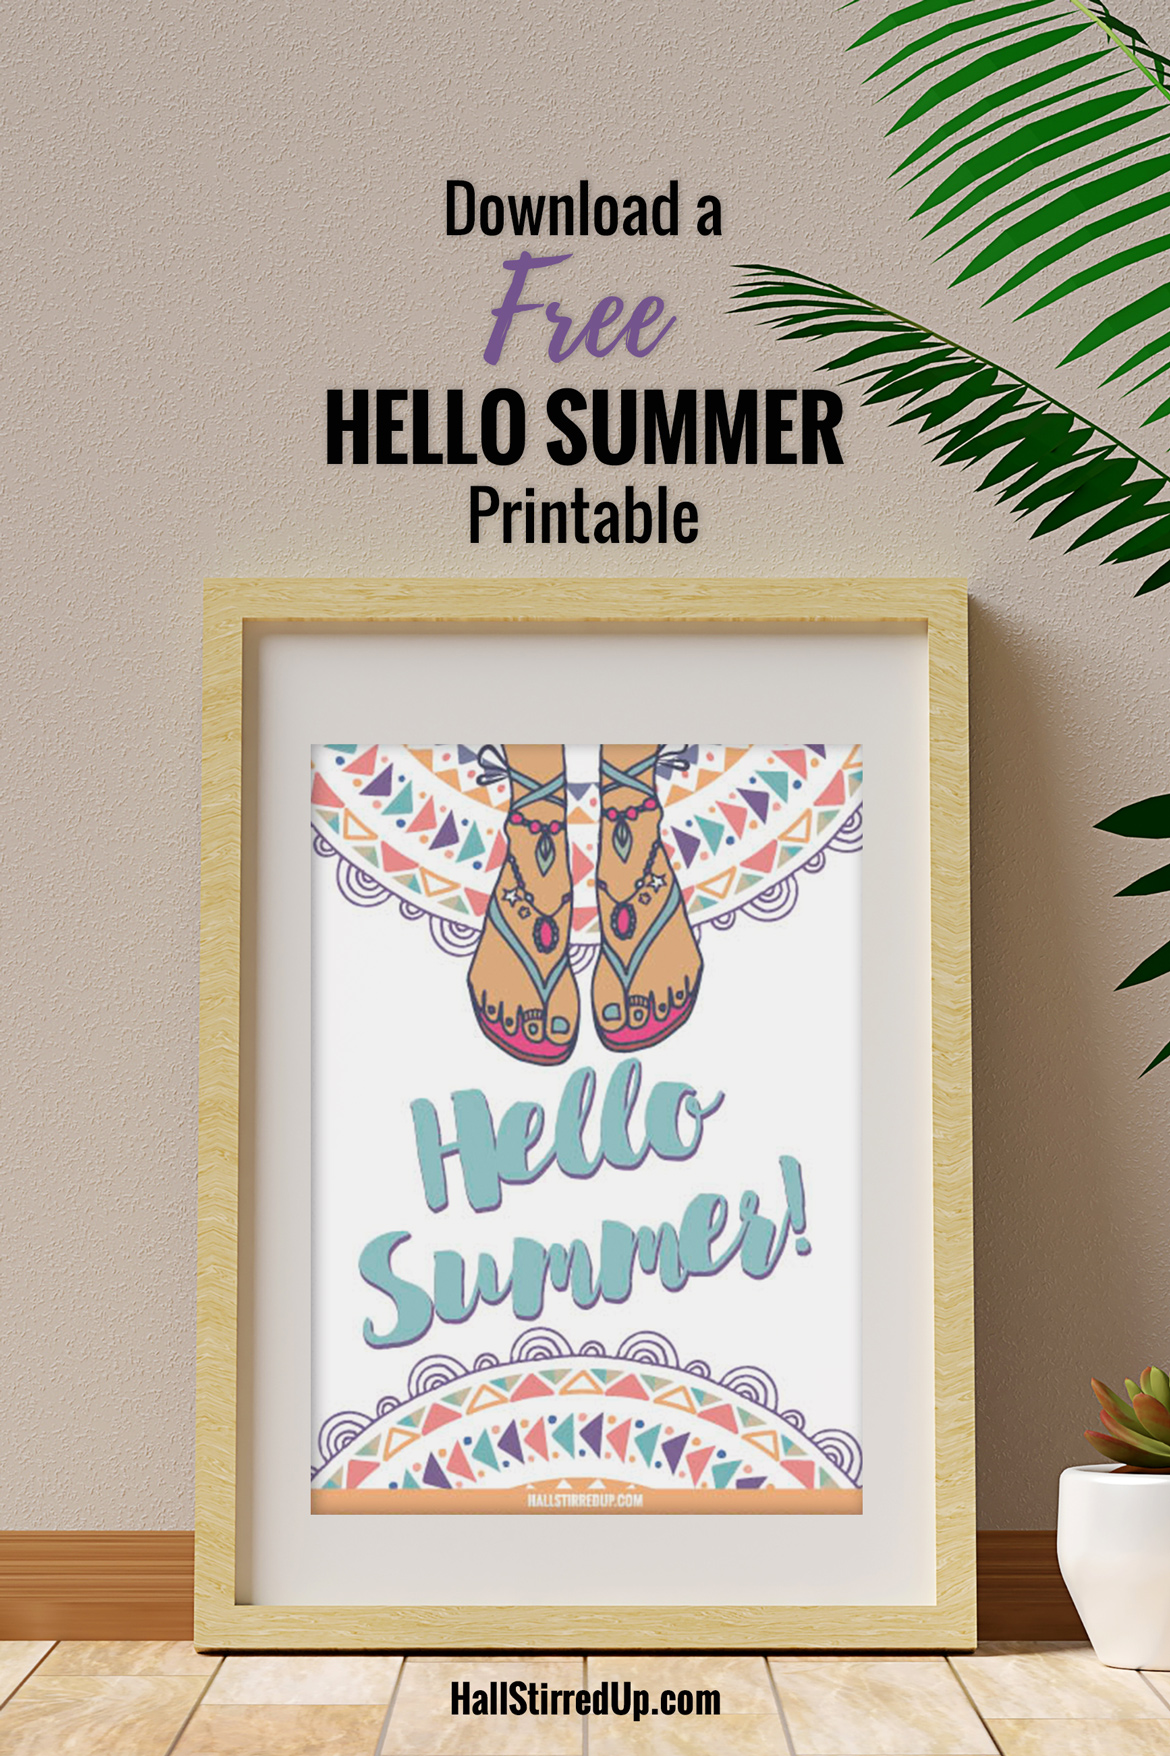 Summer Days! Let's celebrate with a fun free printable